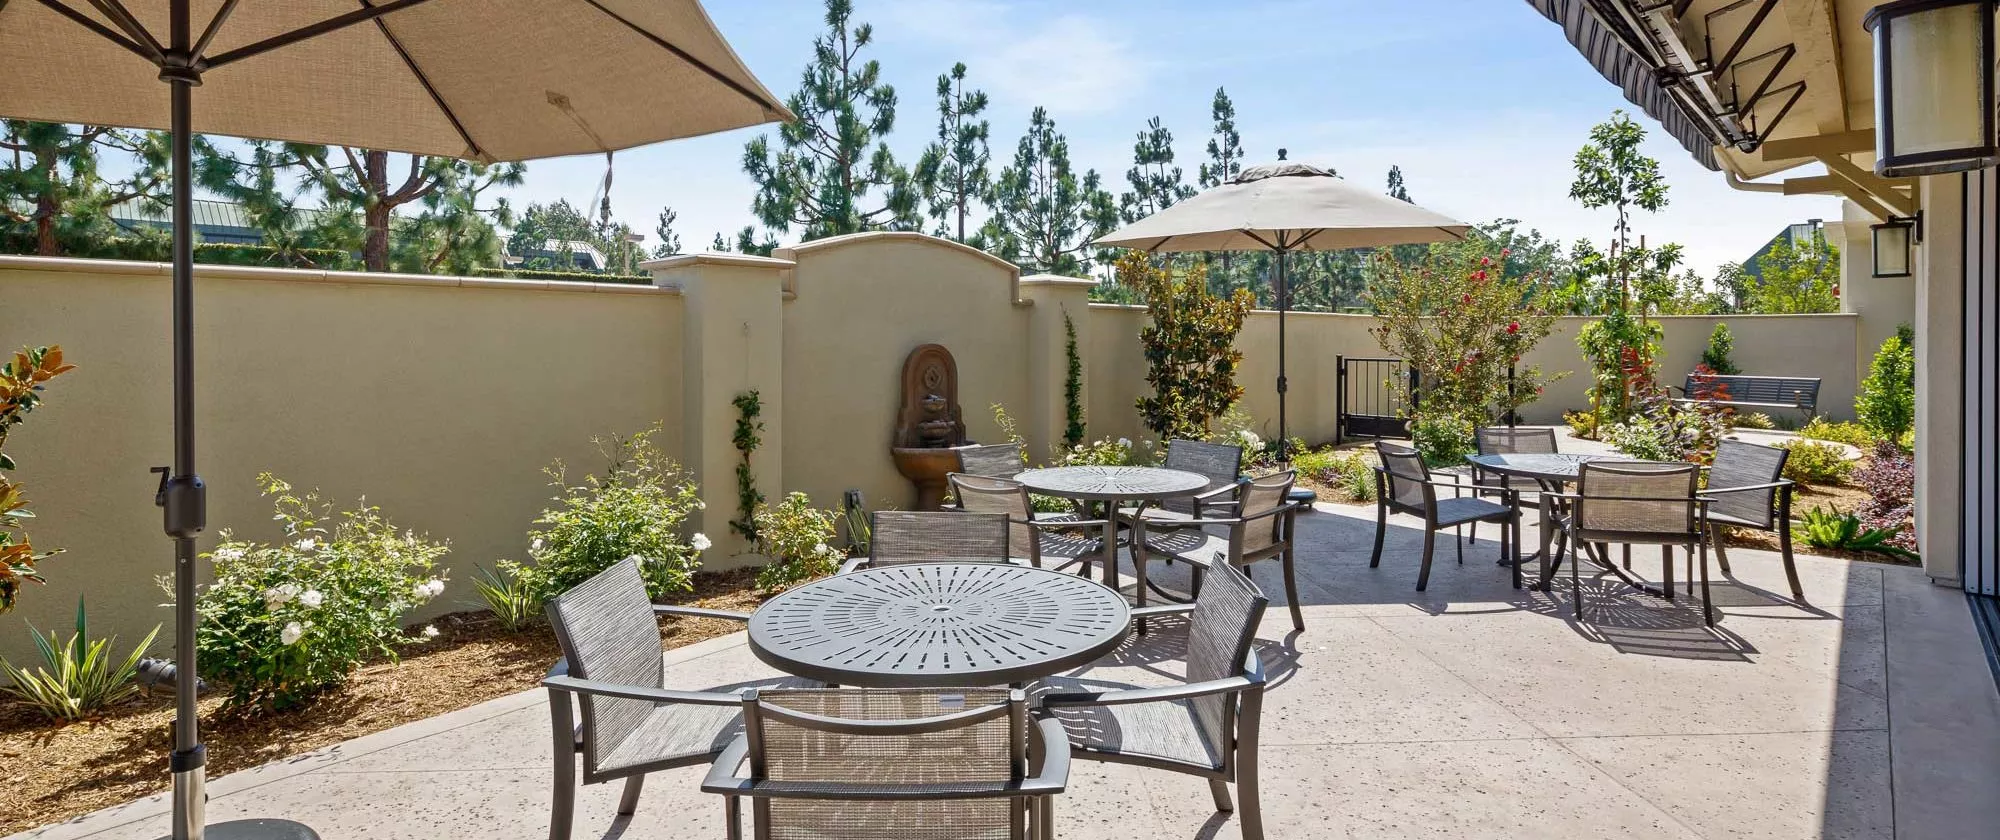 Torrance patio with umbrellas and dining tables